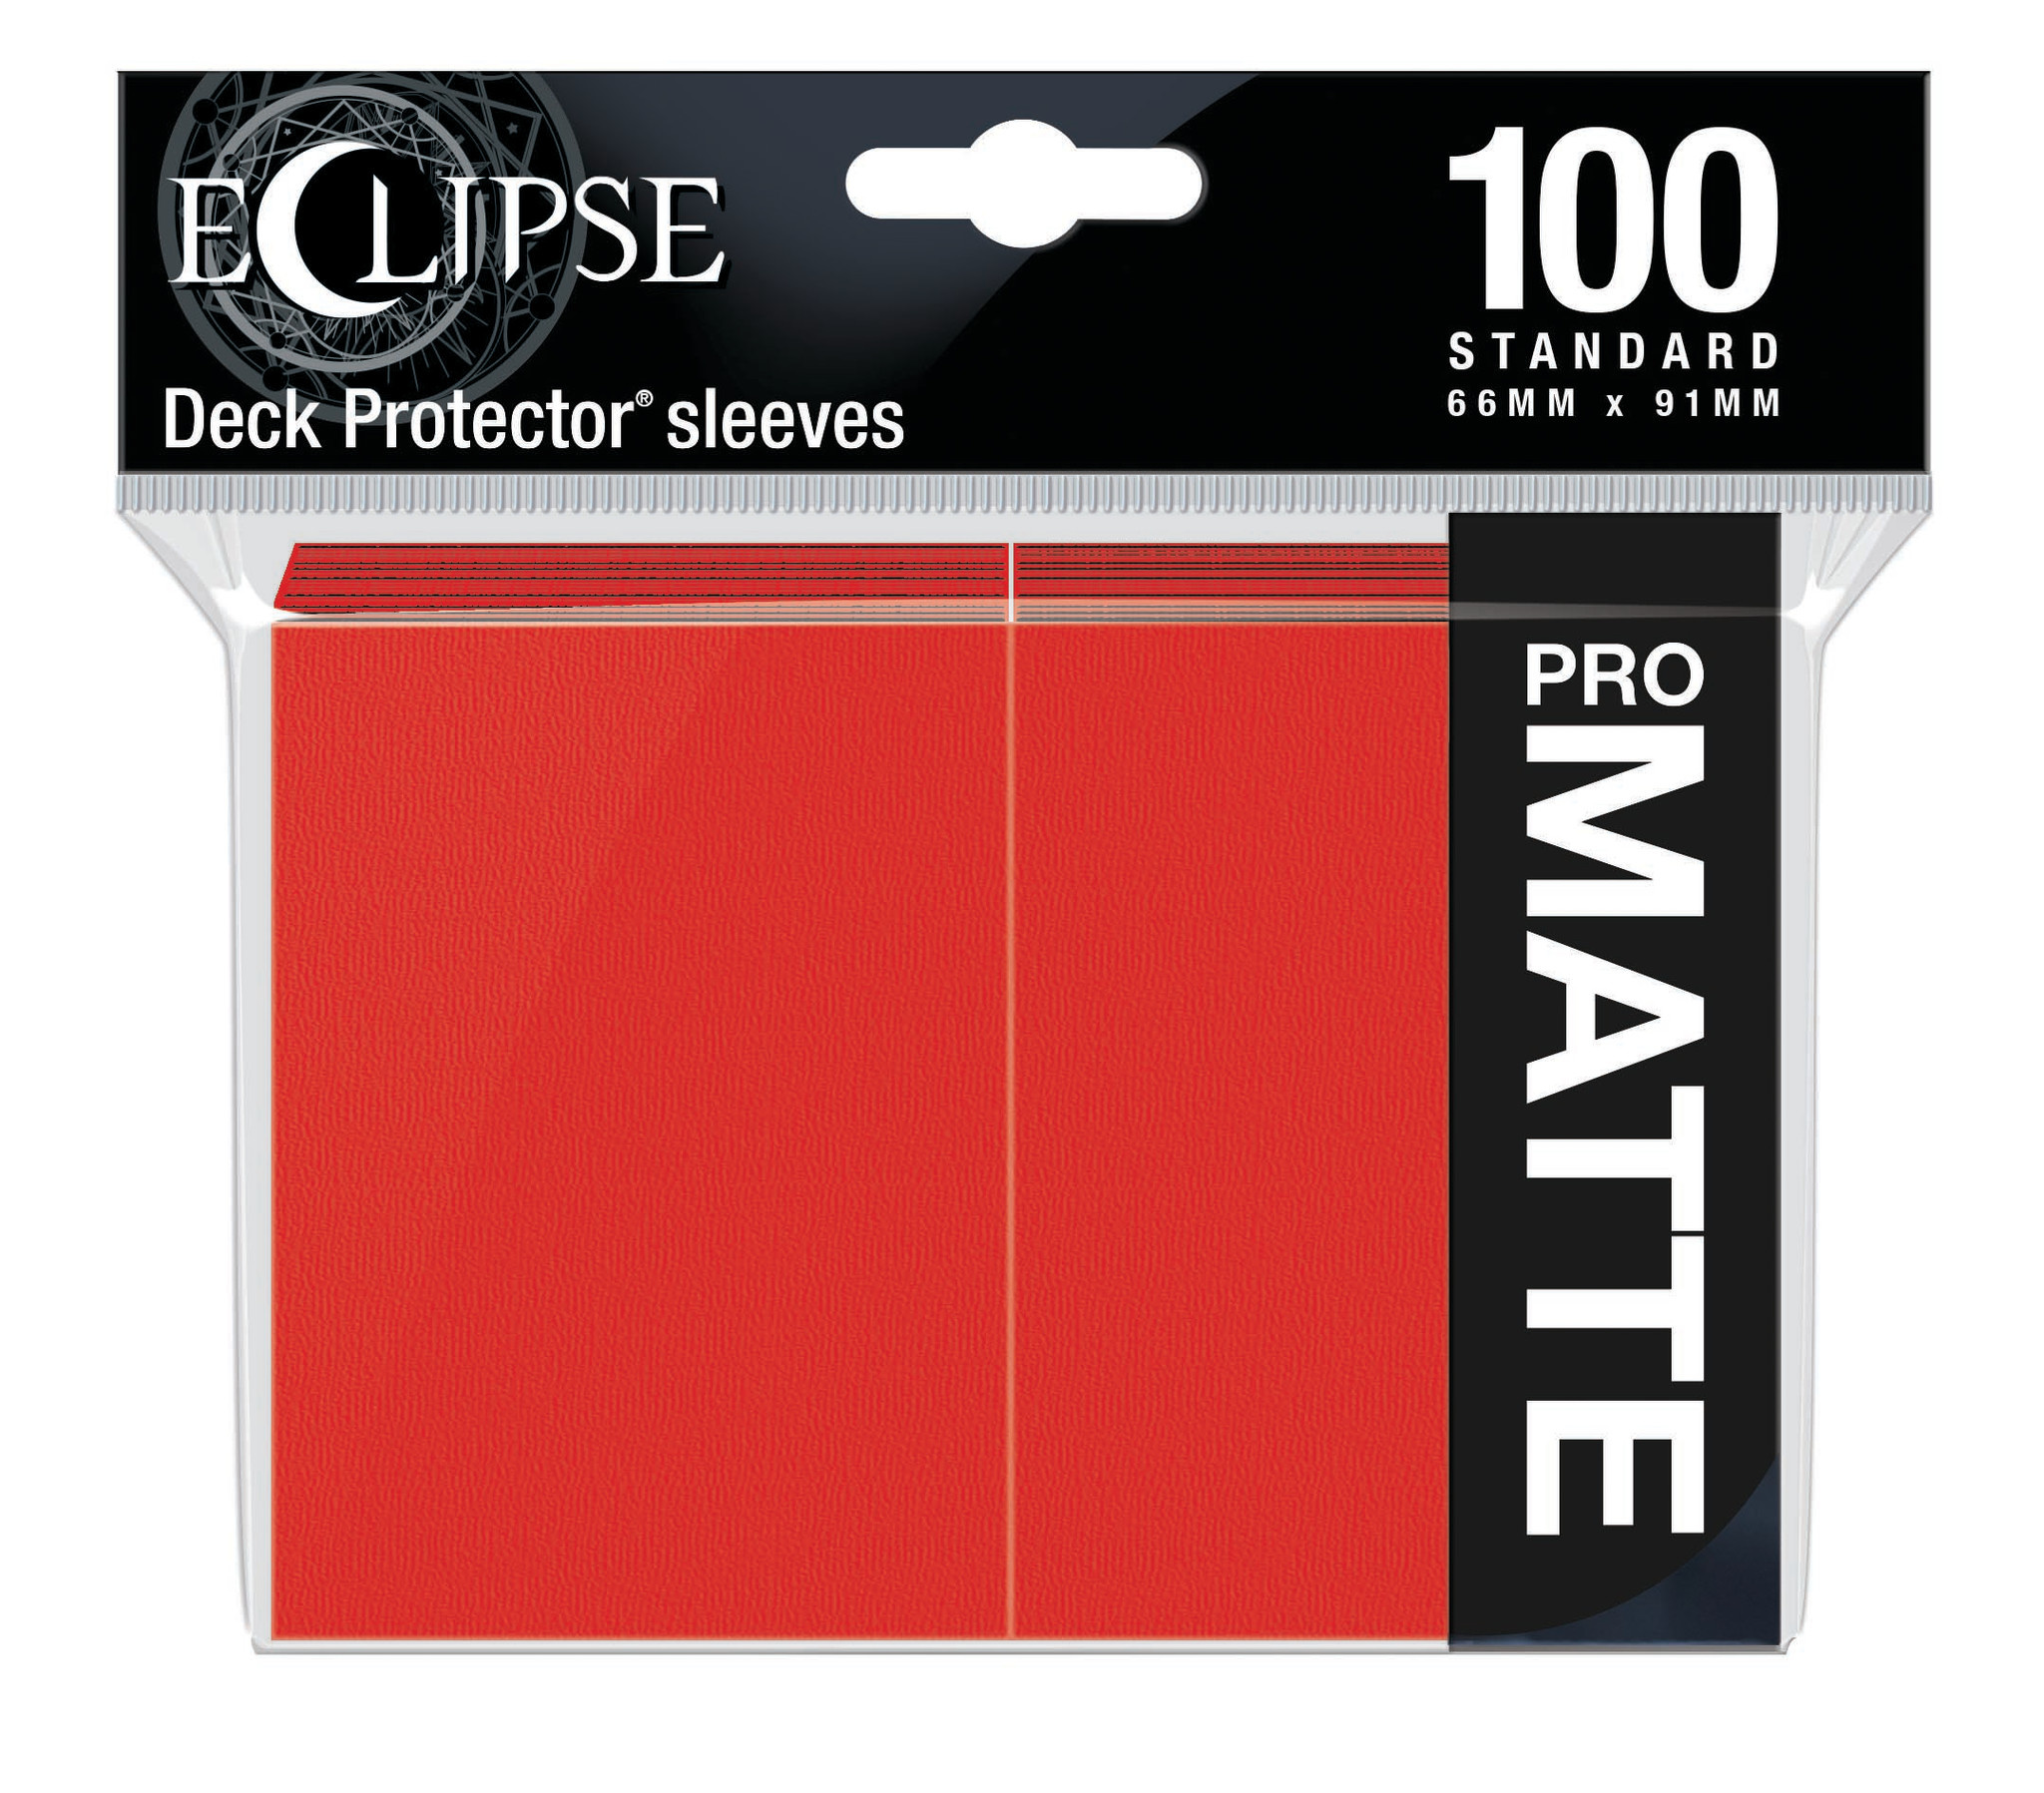 Ultra Pro - 66mm X 91mm - Eclipse Matte Sleeves - Apple Red 100 ct.